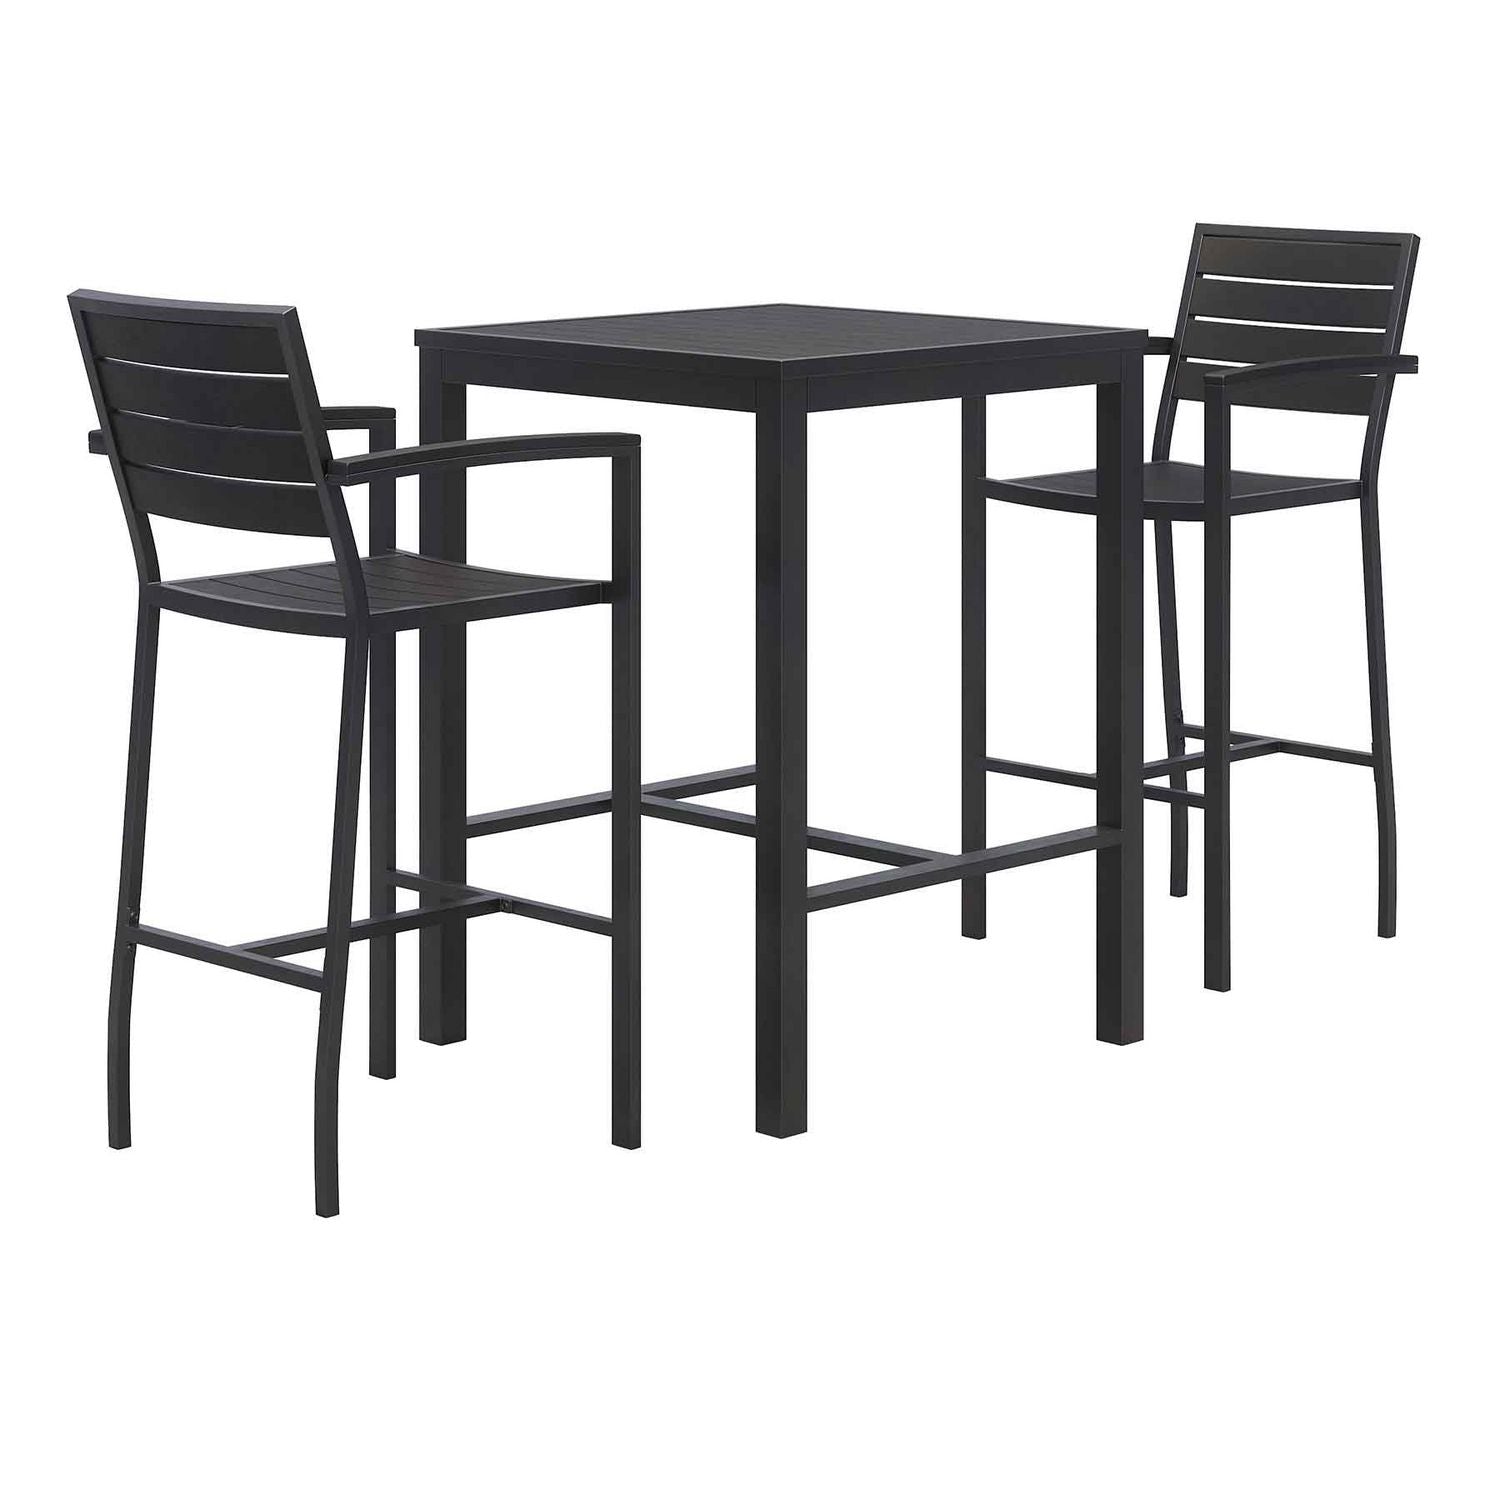 eveleen-outdoor-bistro-patio-table-with-two-black-powder-coated-polymer-barstools-30-square-black-ships-in-4-6-bus-days_kfi840031925275 - 1